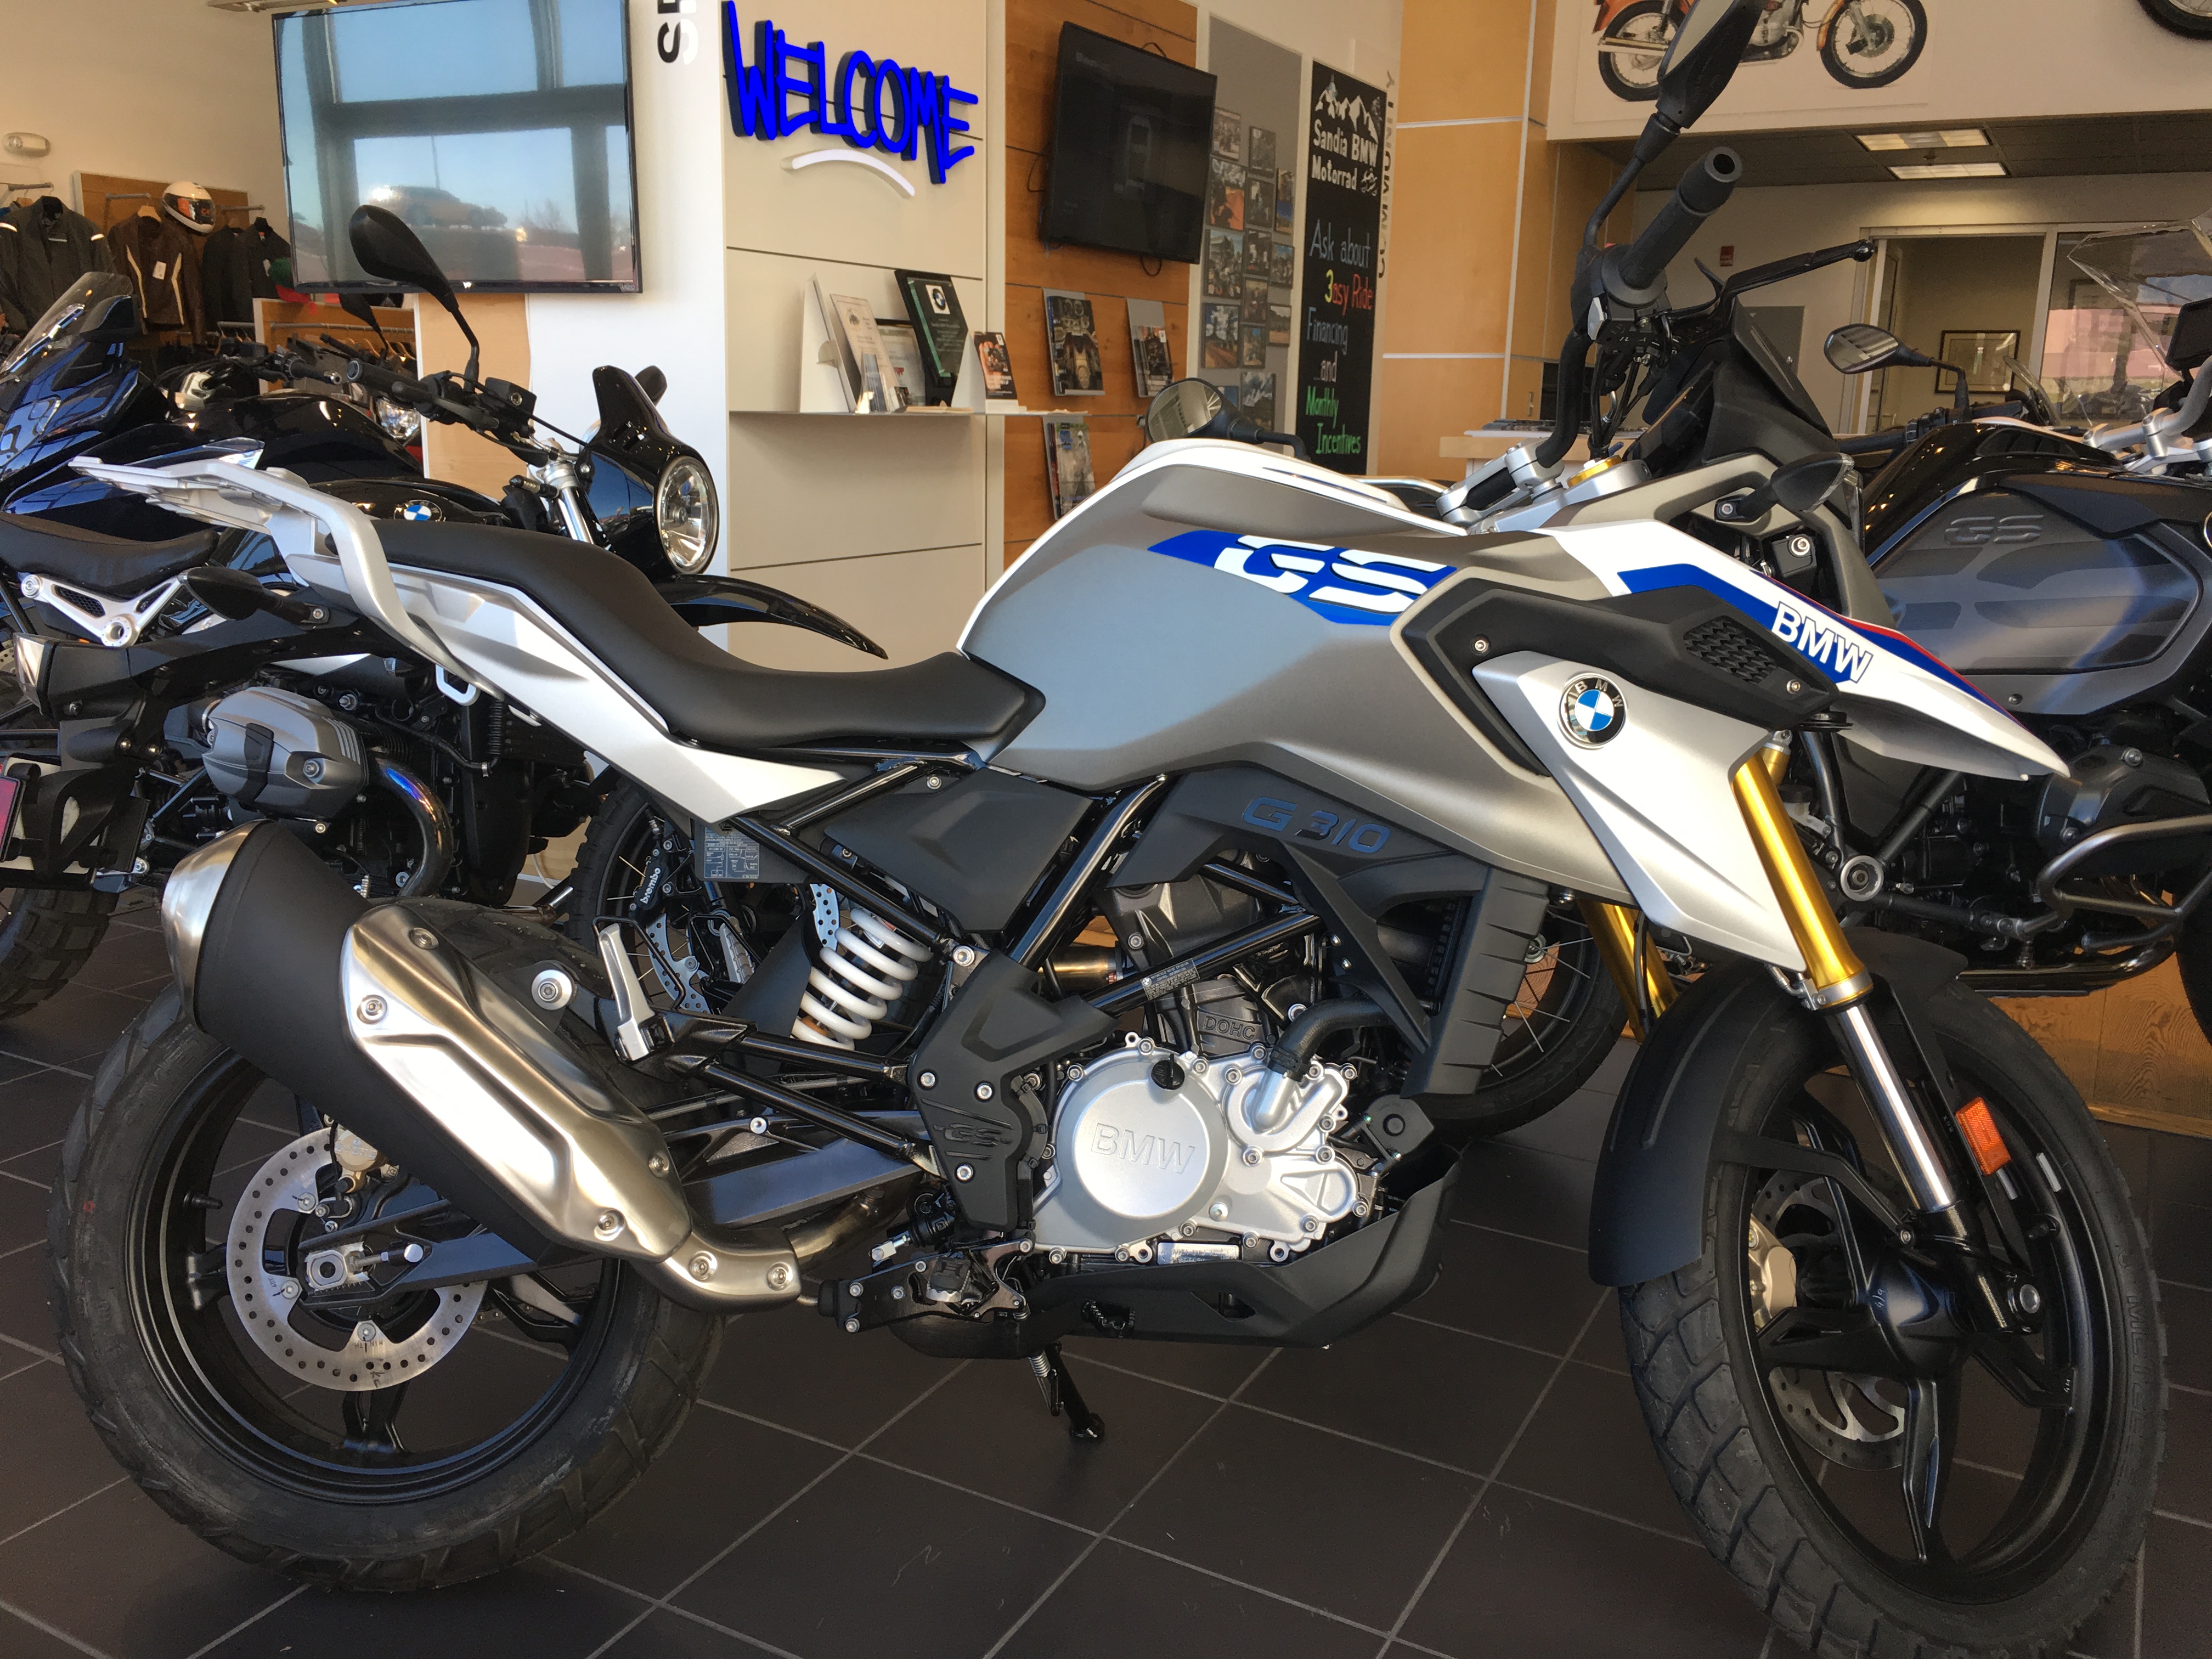 New Motorcycle Inventory - G310GS - Sandia BMW Motorcycles - Albuquerque, NM.